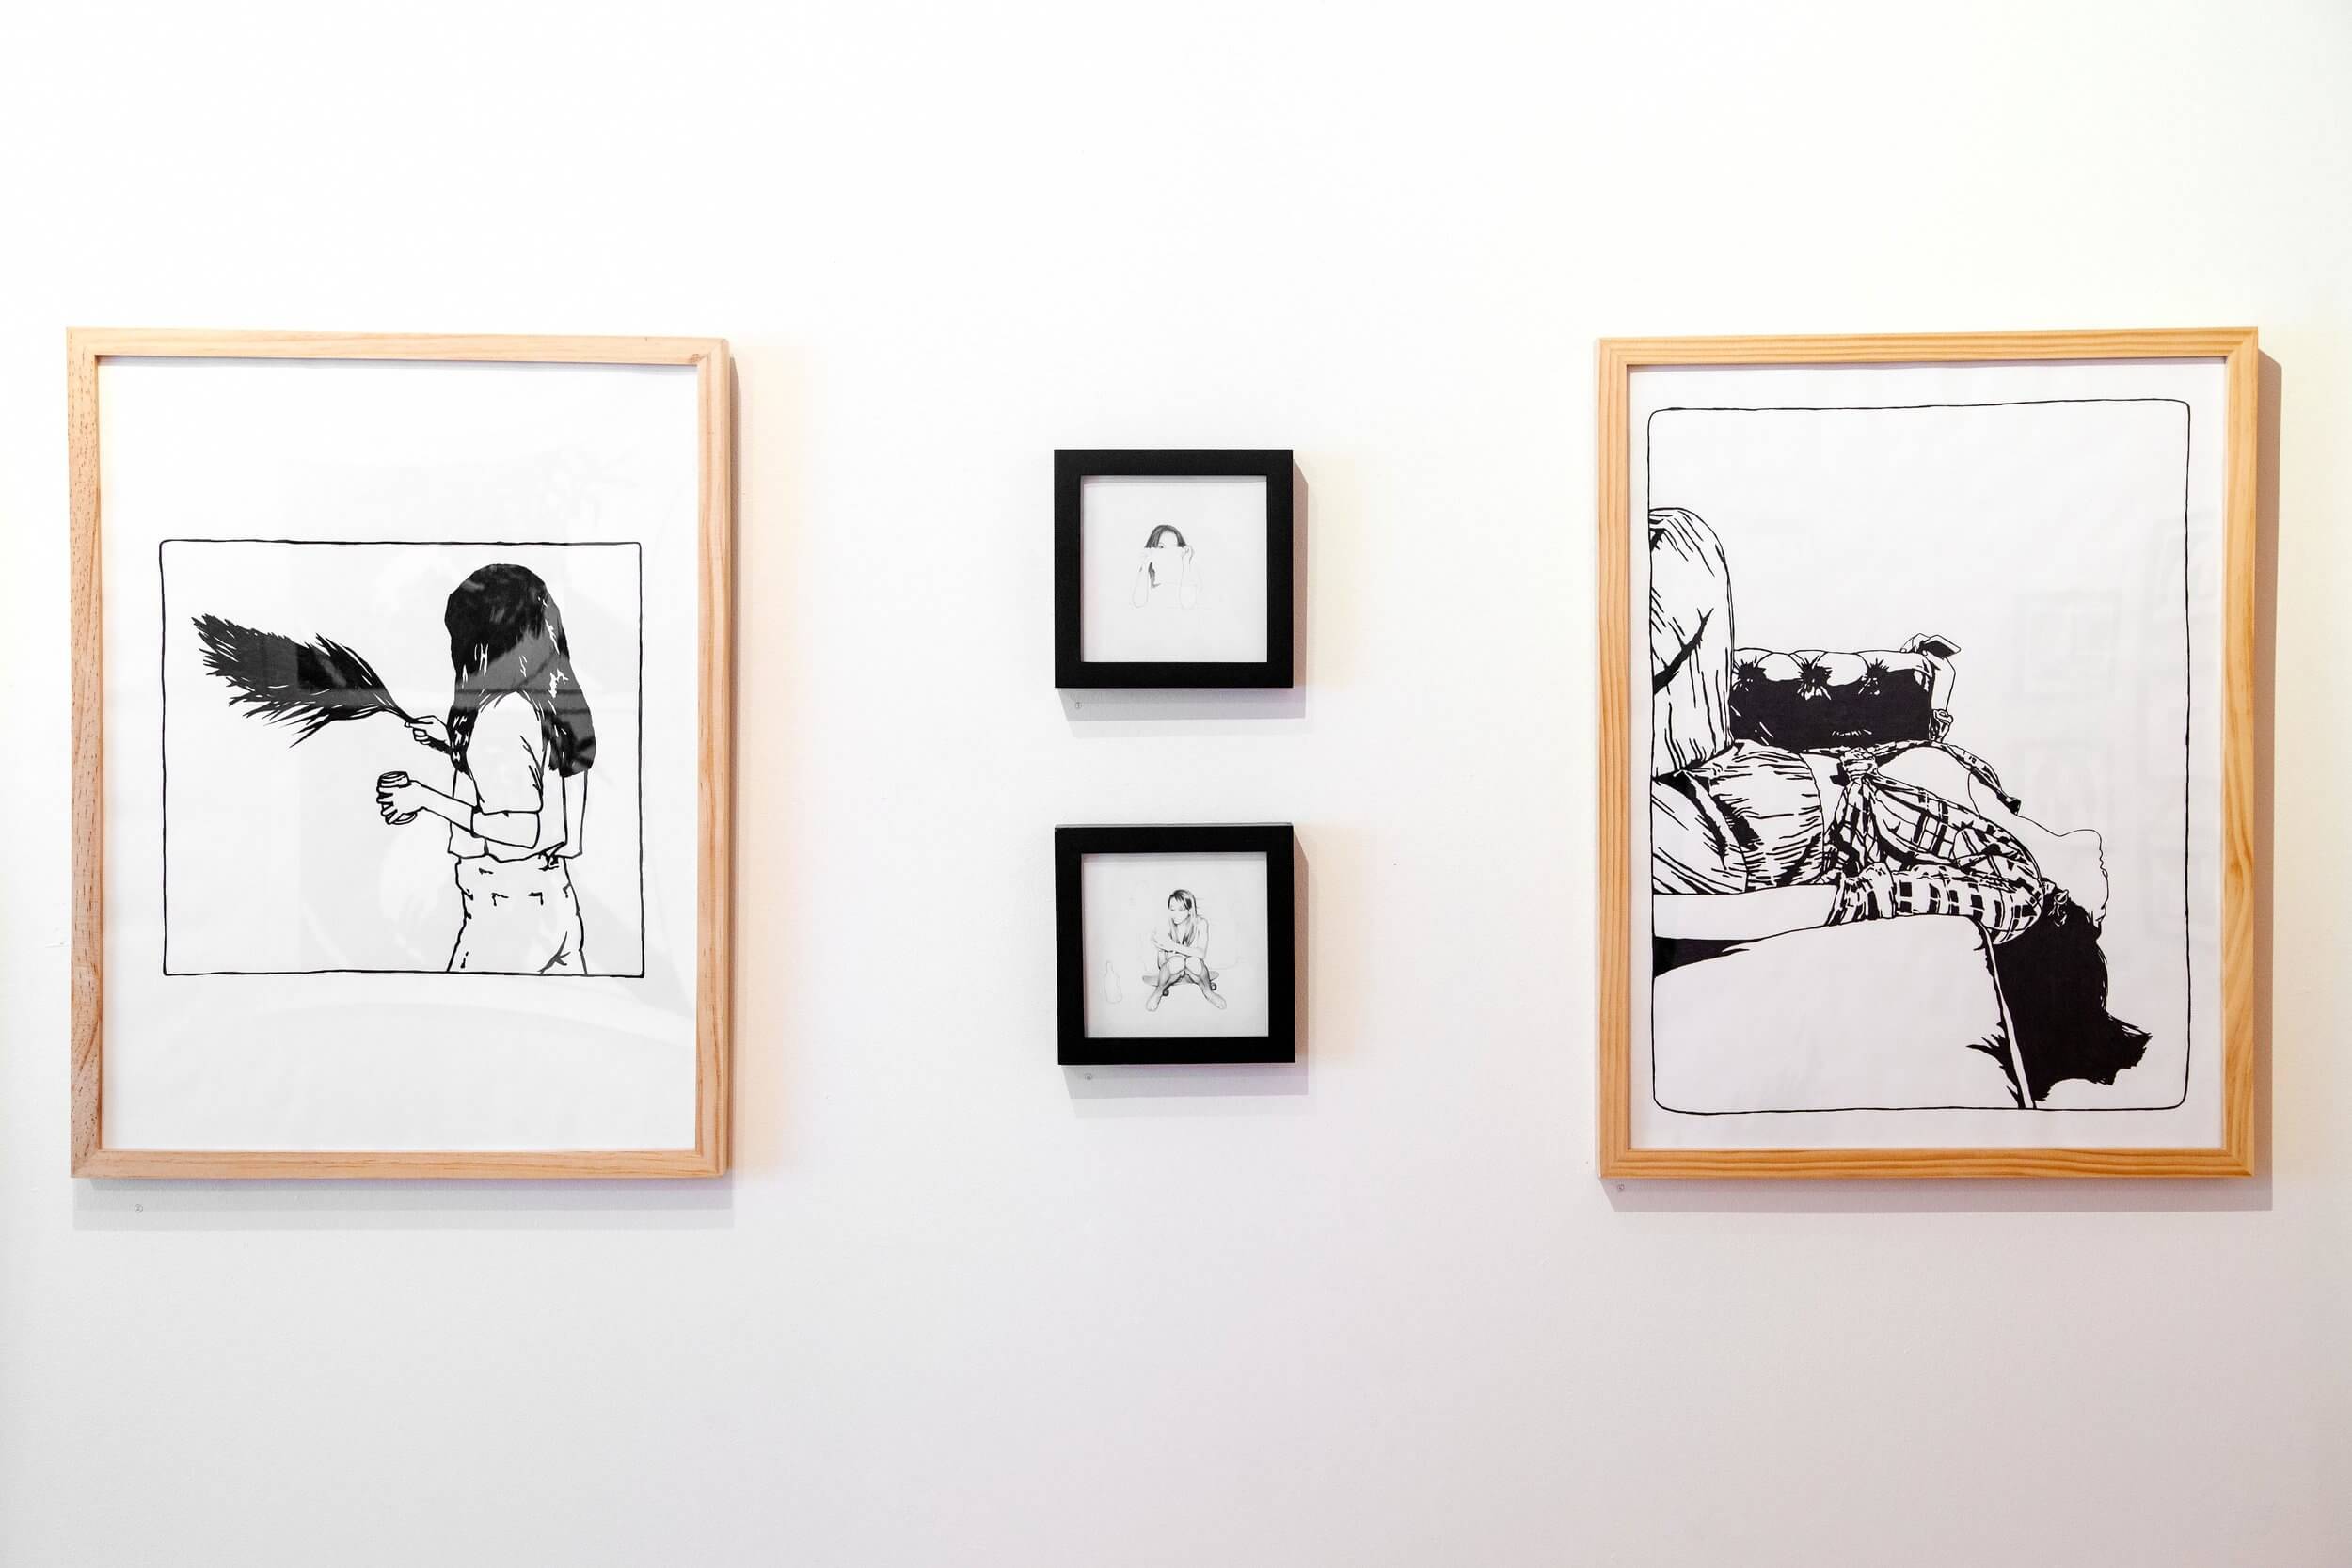 Art by Emma Wasielke - Installation view from "Diary of Days" Ink on Paper, pencil on paper, 2018